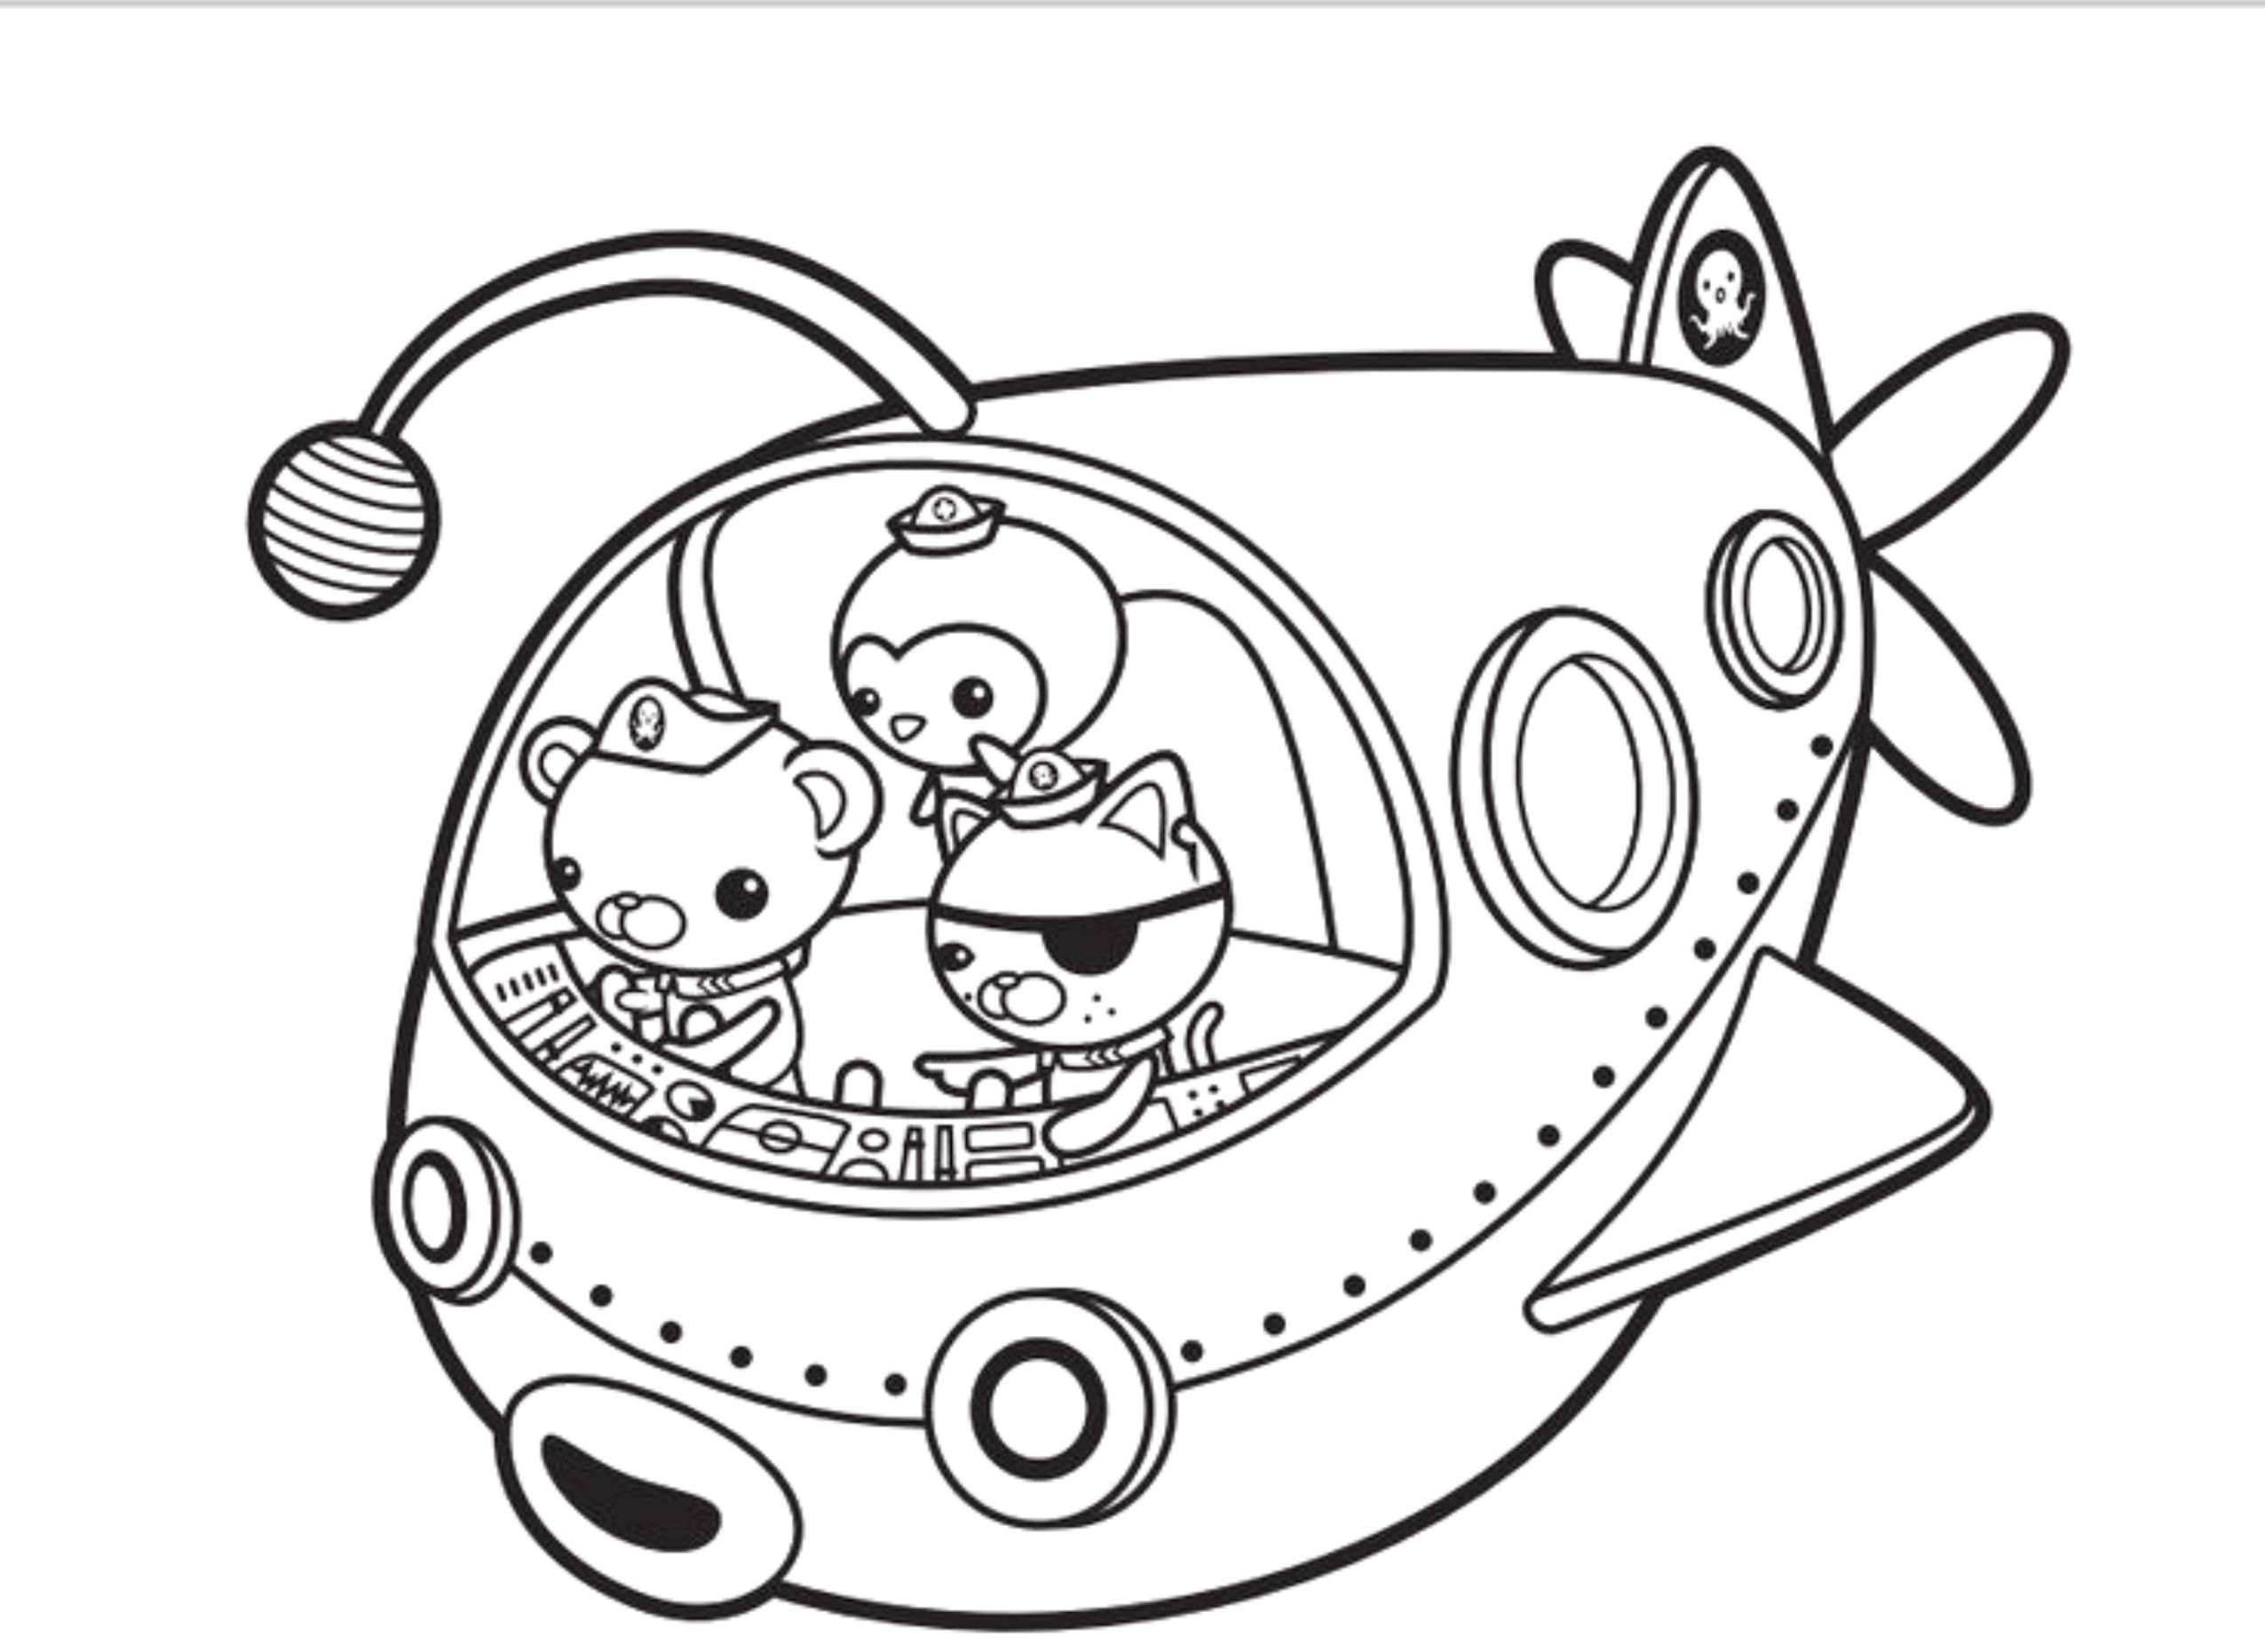 Octonauts Coloring Pages To Print
 Print & Download Octonauts Coloring Pages for Your Kid’s